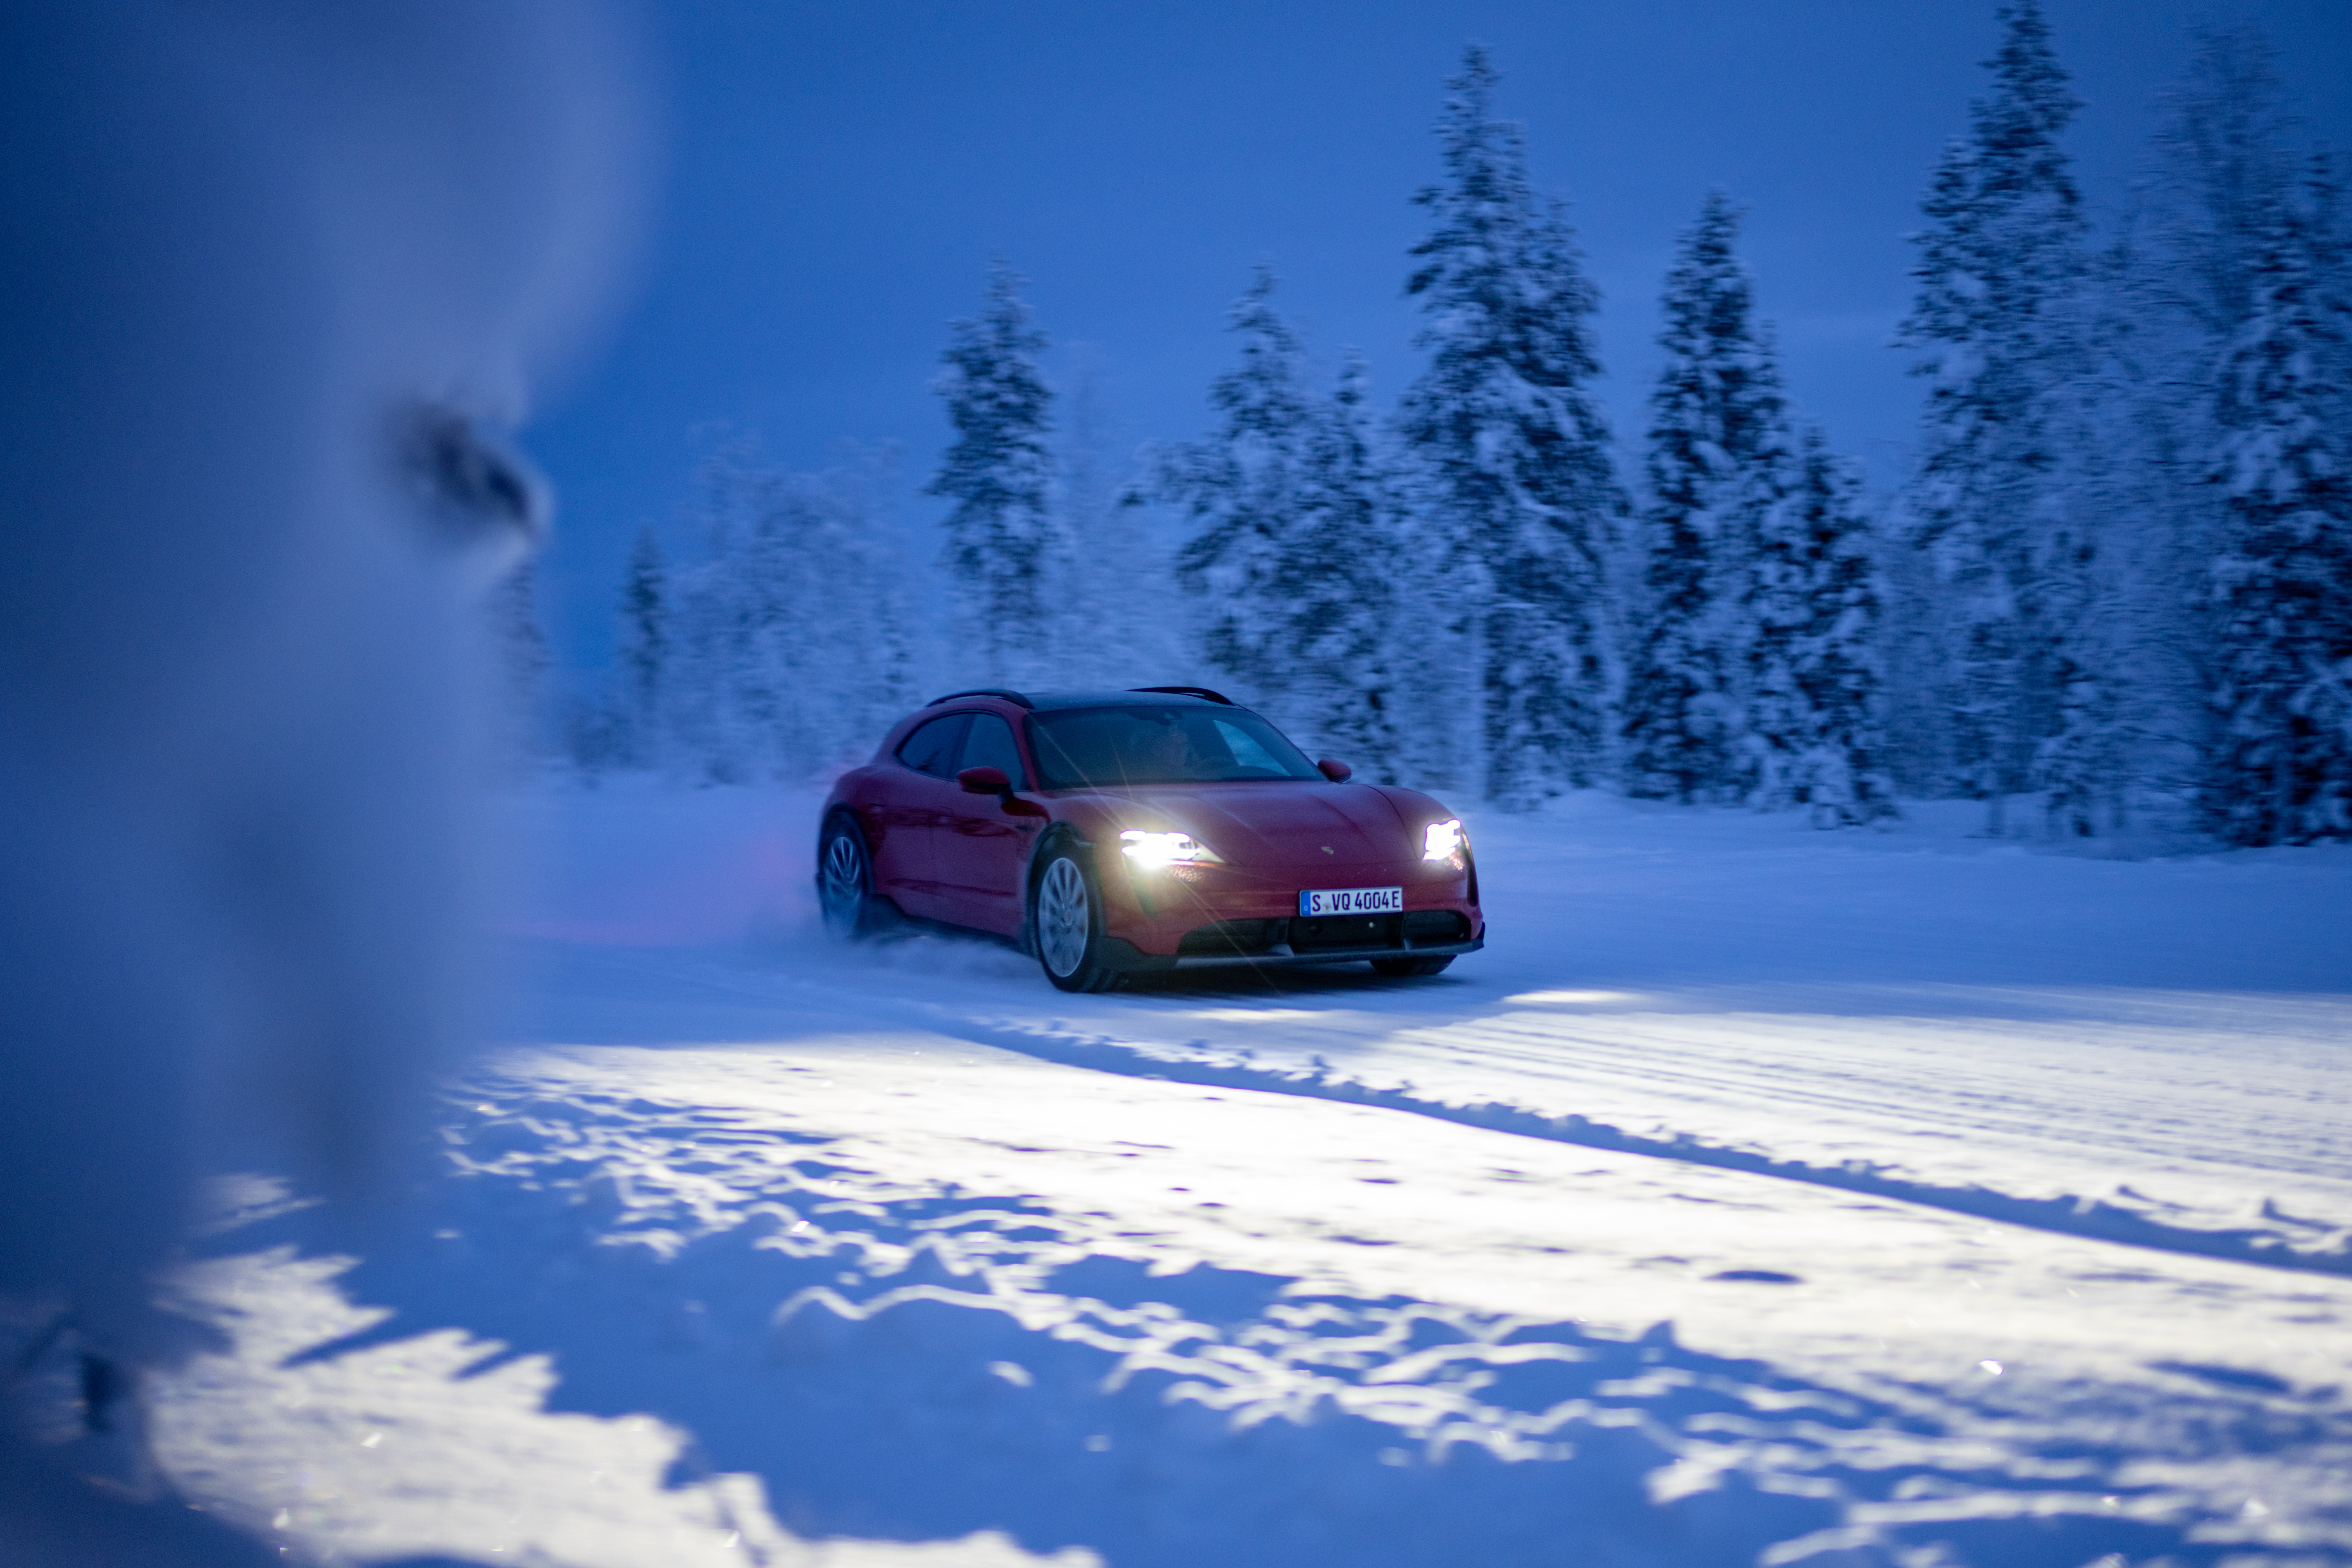 Red Porsche Taycan, headlights on, driving on snowy road